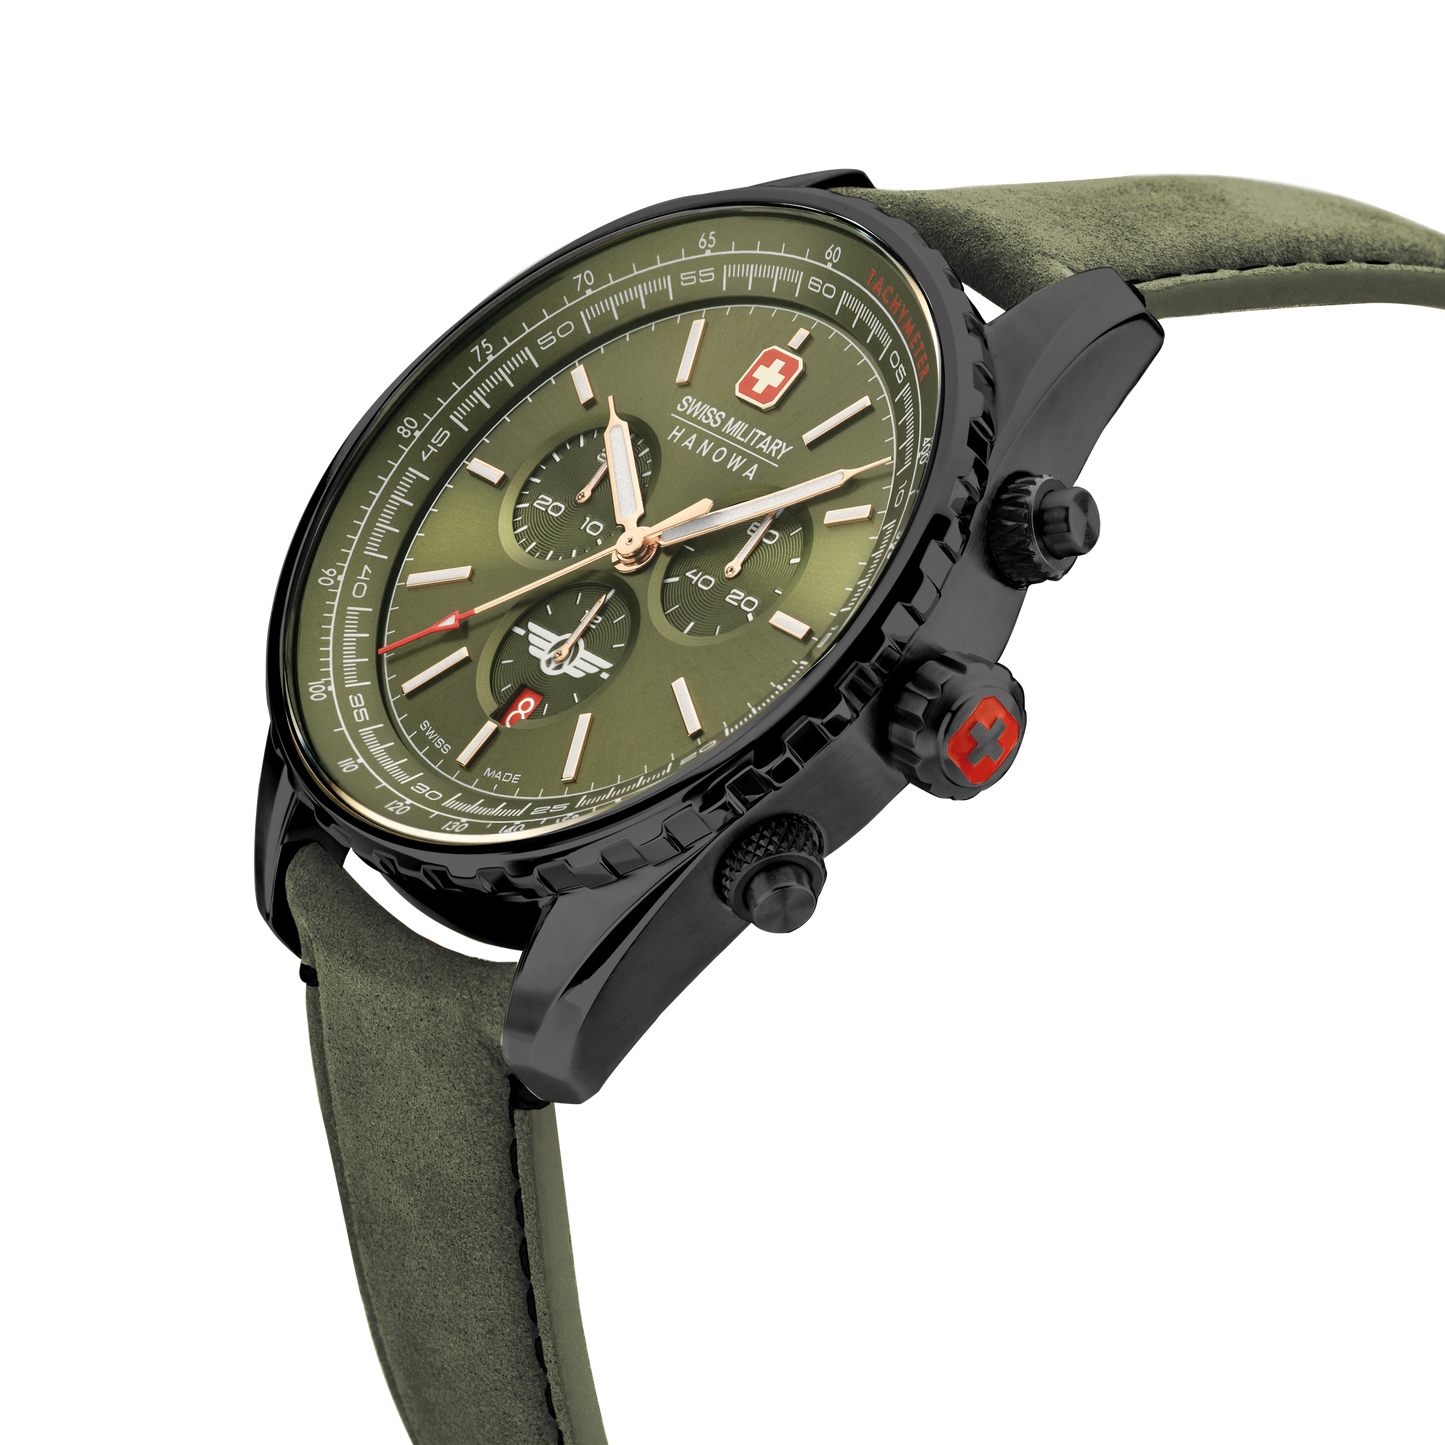 Swiss Military Hanowa Afterburn Chrono. Stainless steel case in gunmetal PDV plating, olive green dial and a genuine olive green Italian leather strap. Side image.